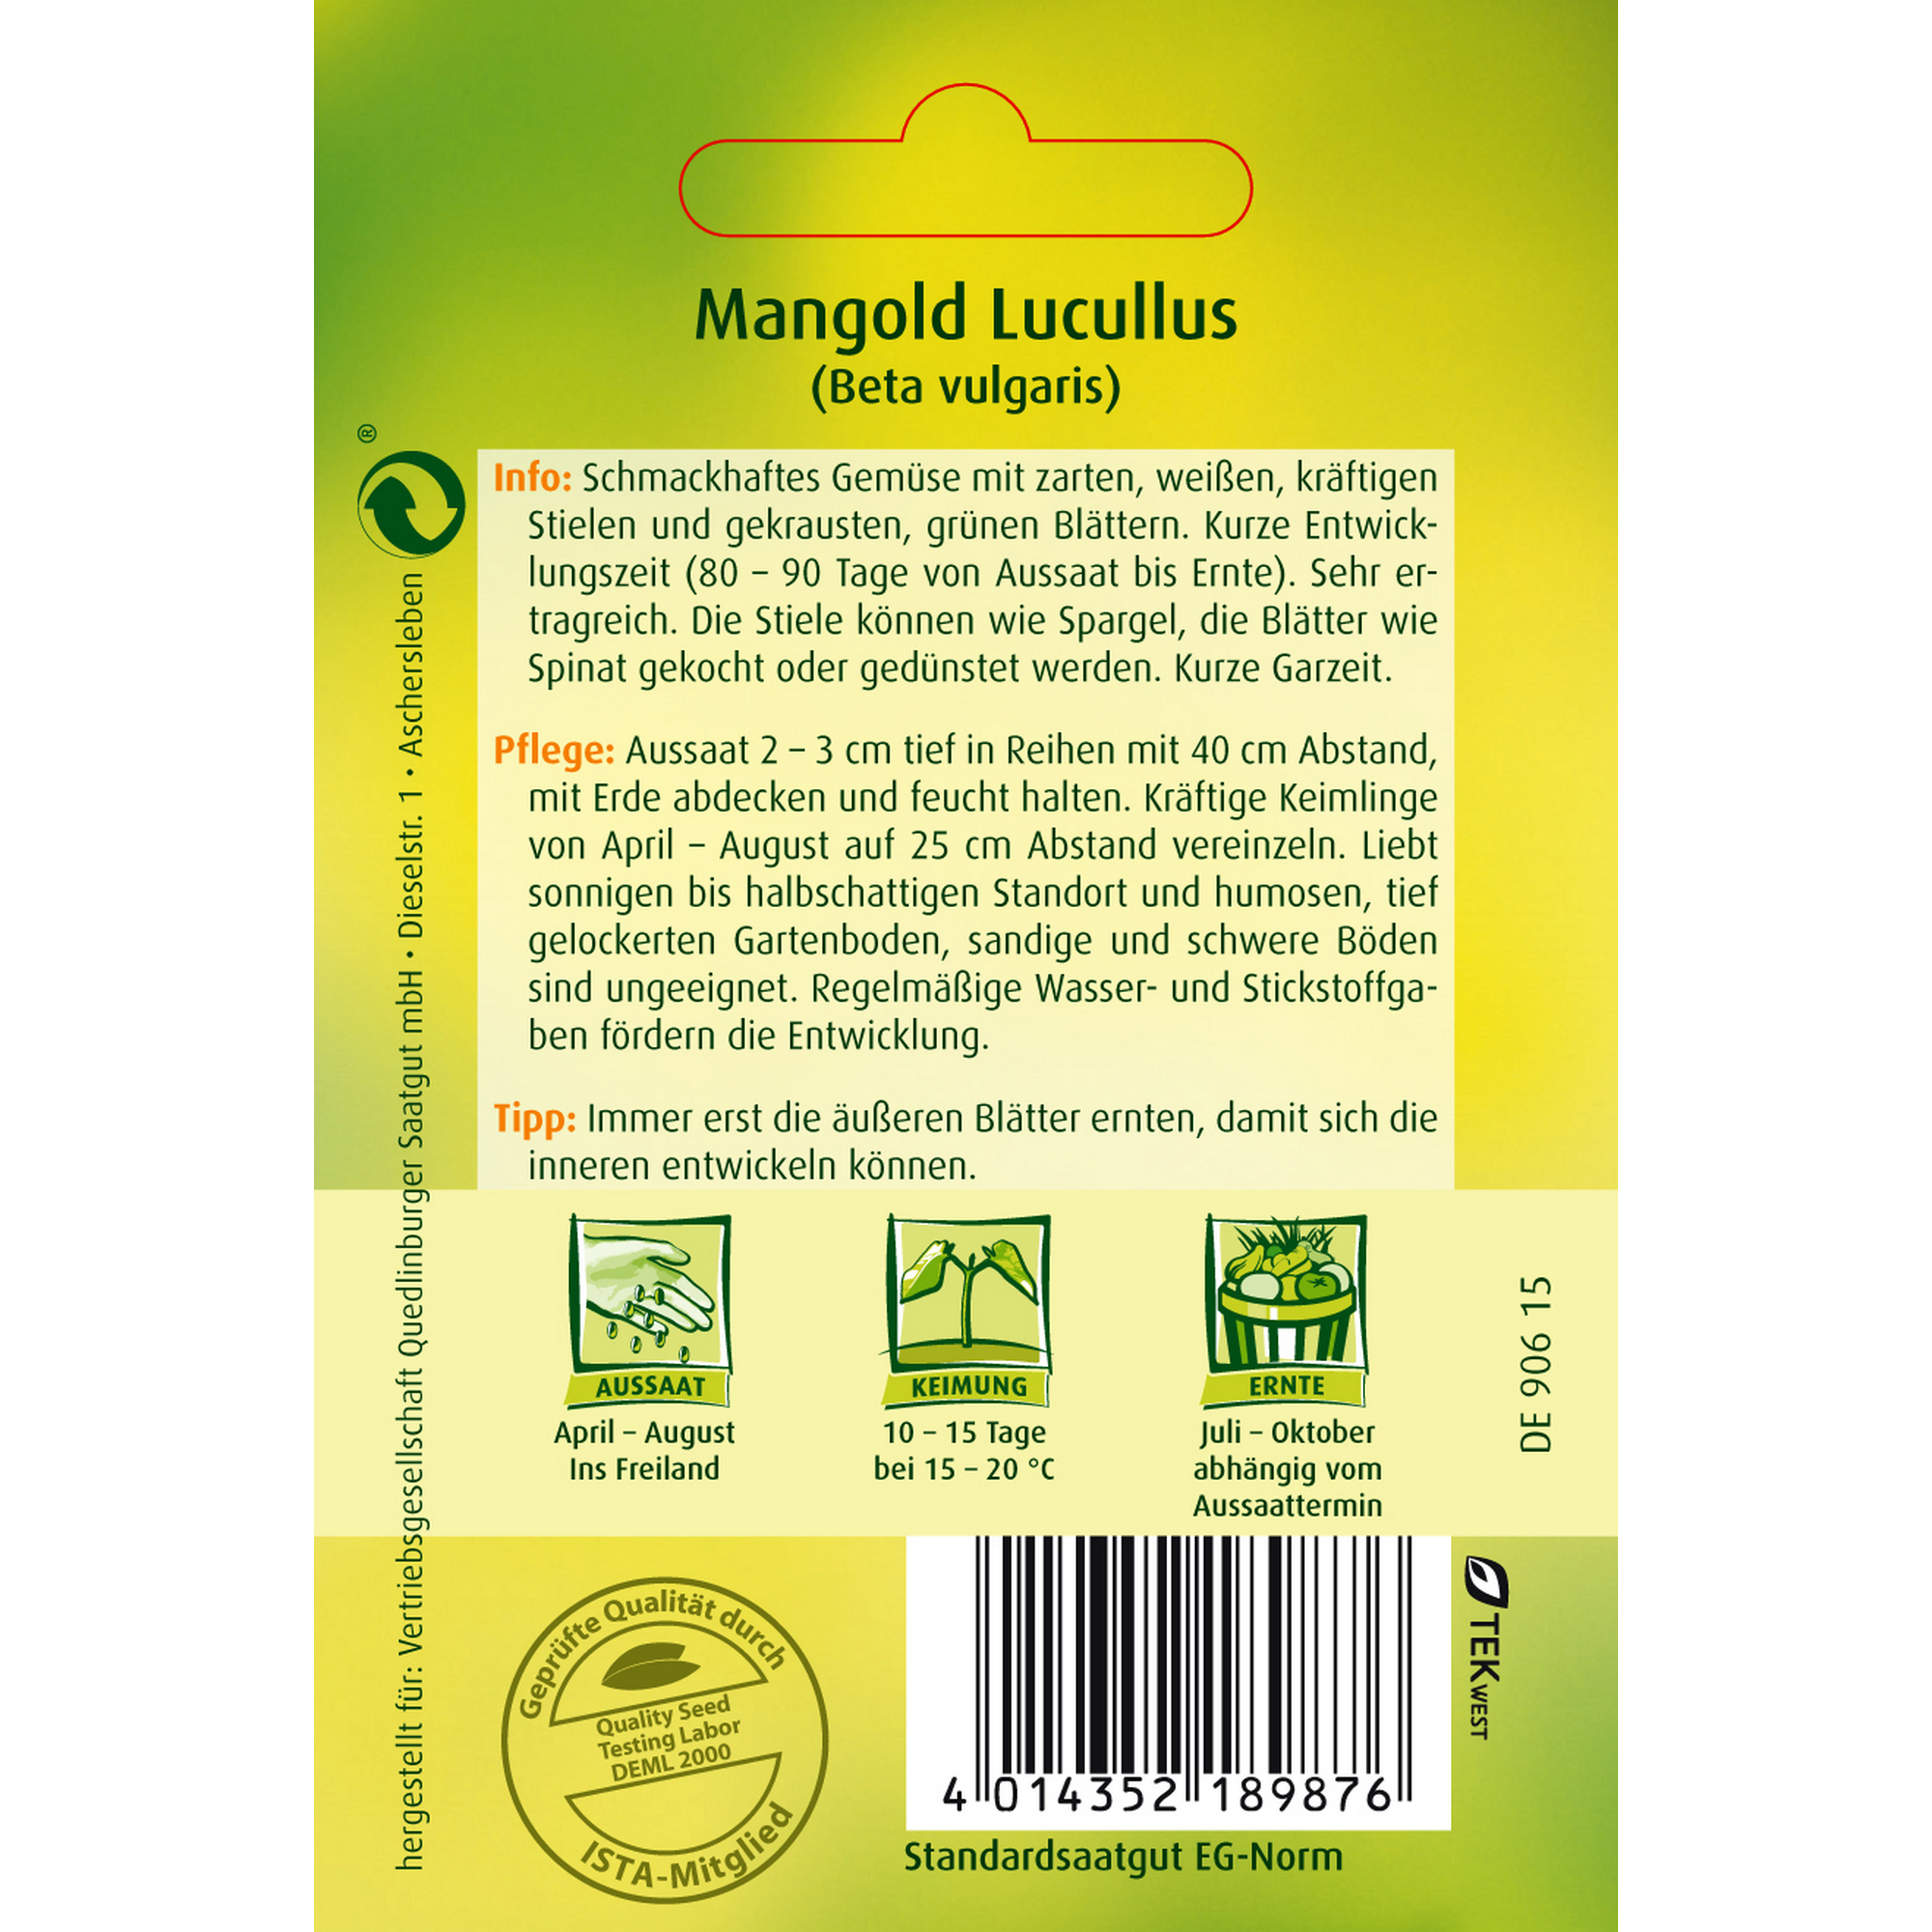 Mangold 'Lucullus' + product picture